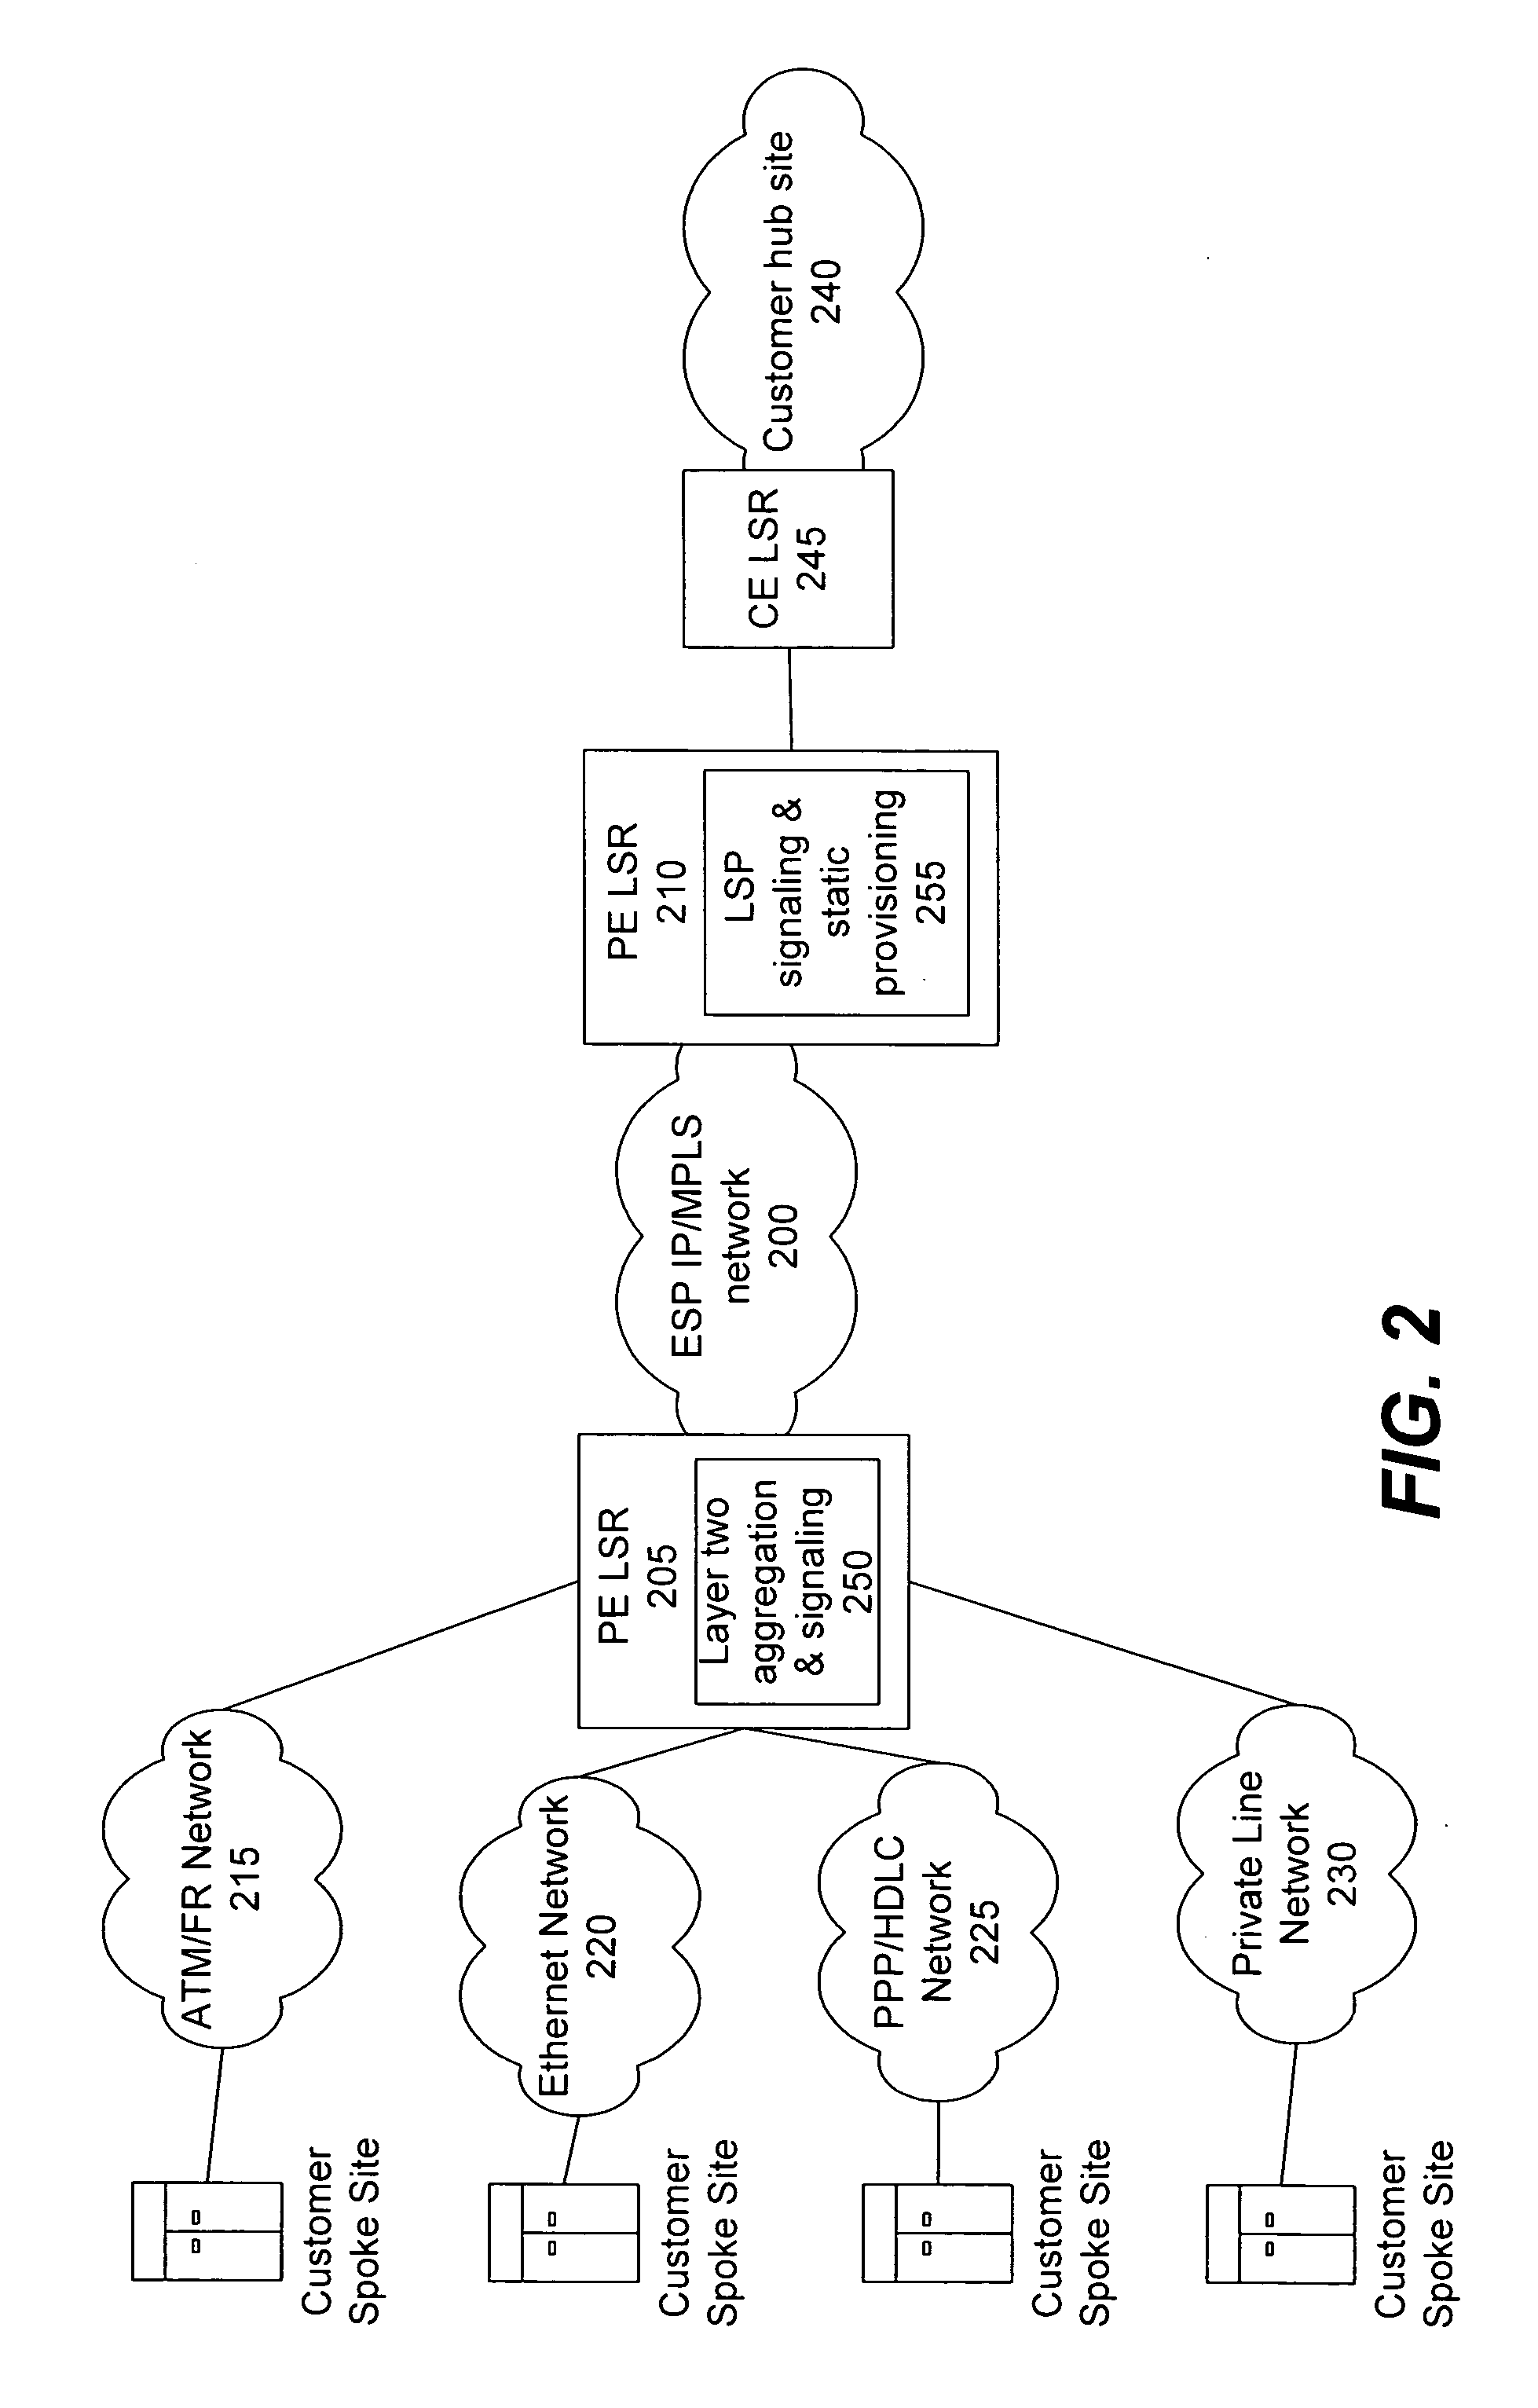 Methods, systems, and computer program products for encapsulating packet traffic associated with multiple layer two technologies